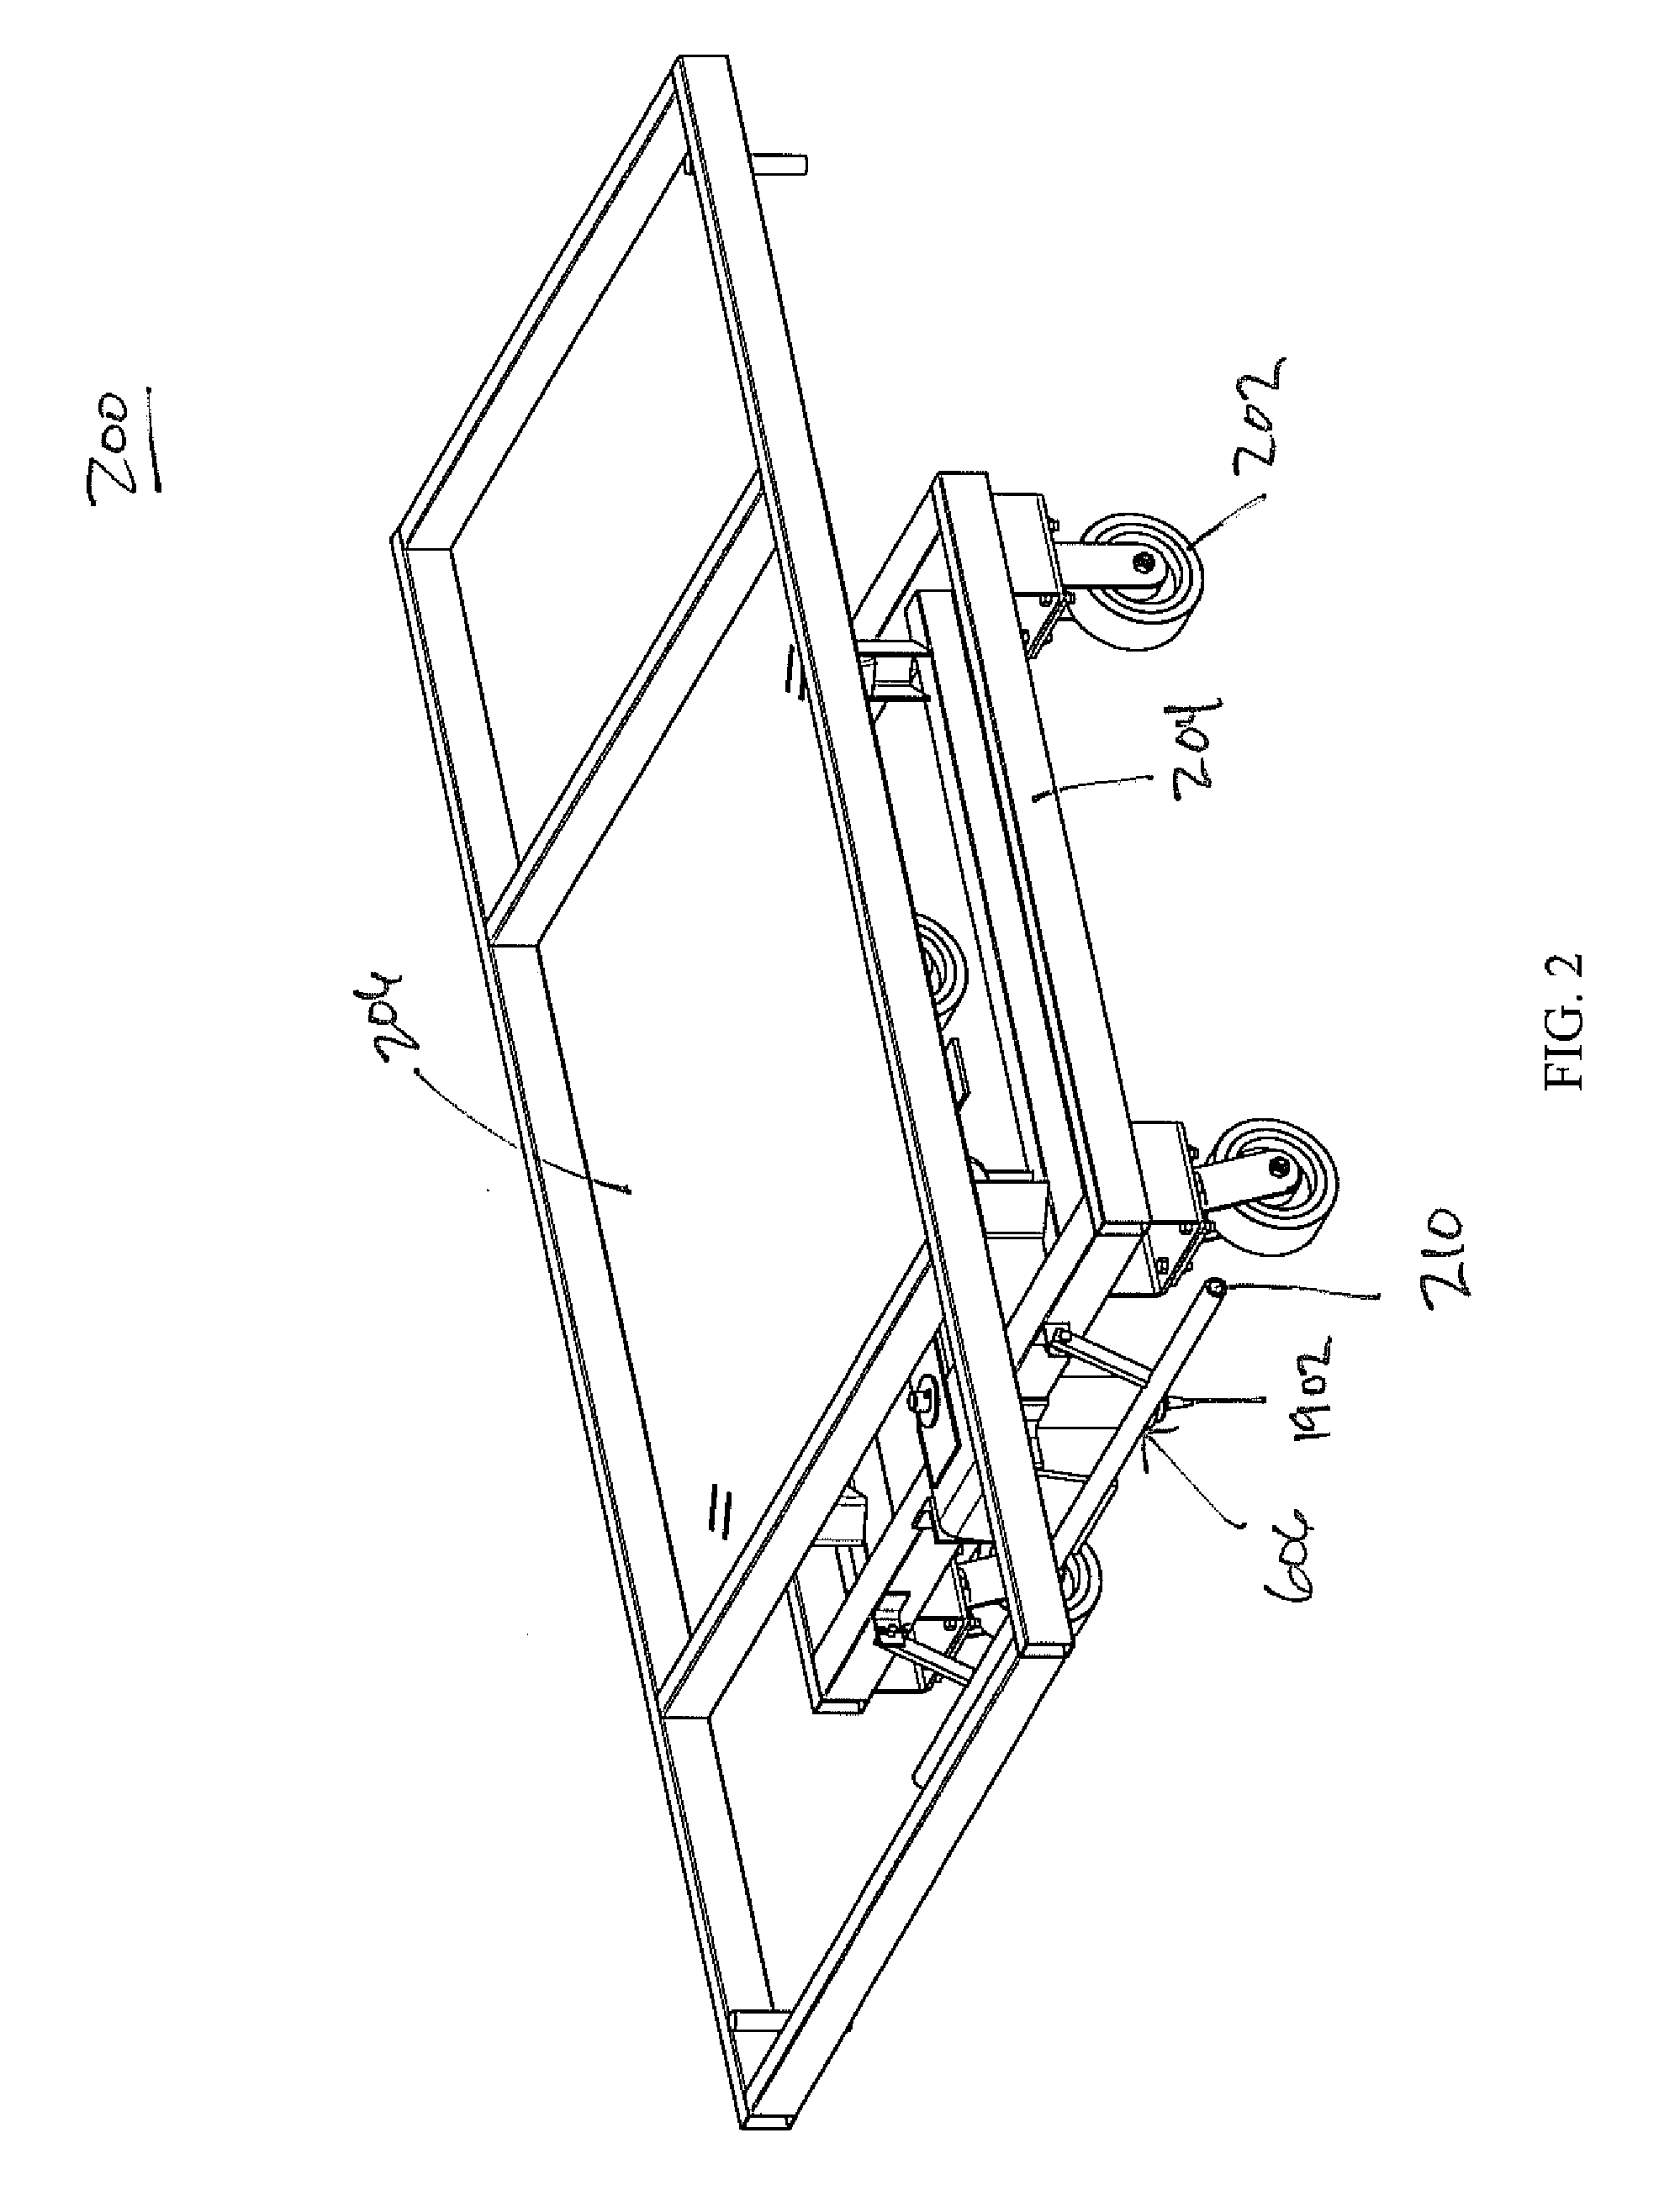 Systems, methods, and apparatus for improved conveyor system